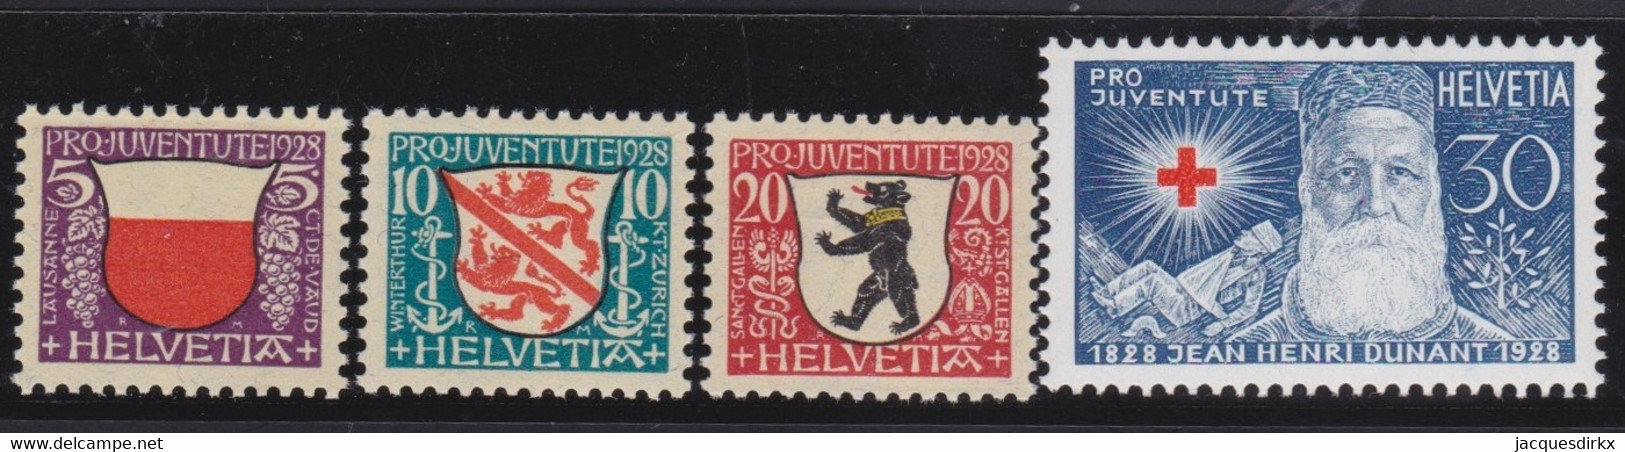 Suisse  .    Y&T    .    231/234      .   *       .    Neuf Avec Gomme  .   /  .   Mint-hinged - Ungebraucht